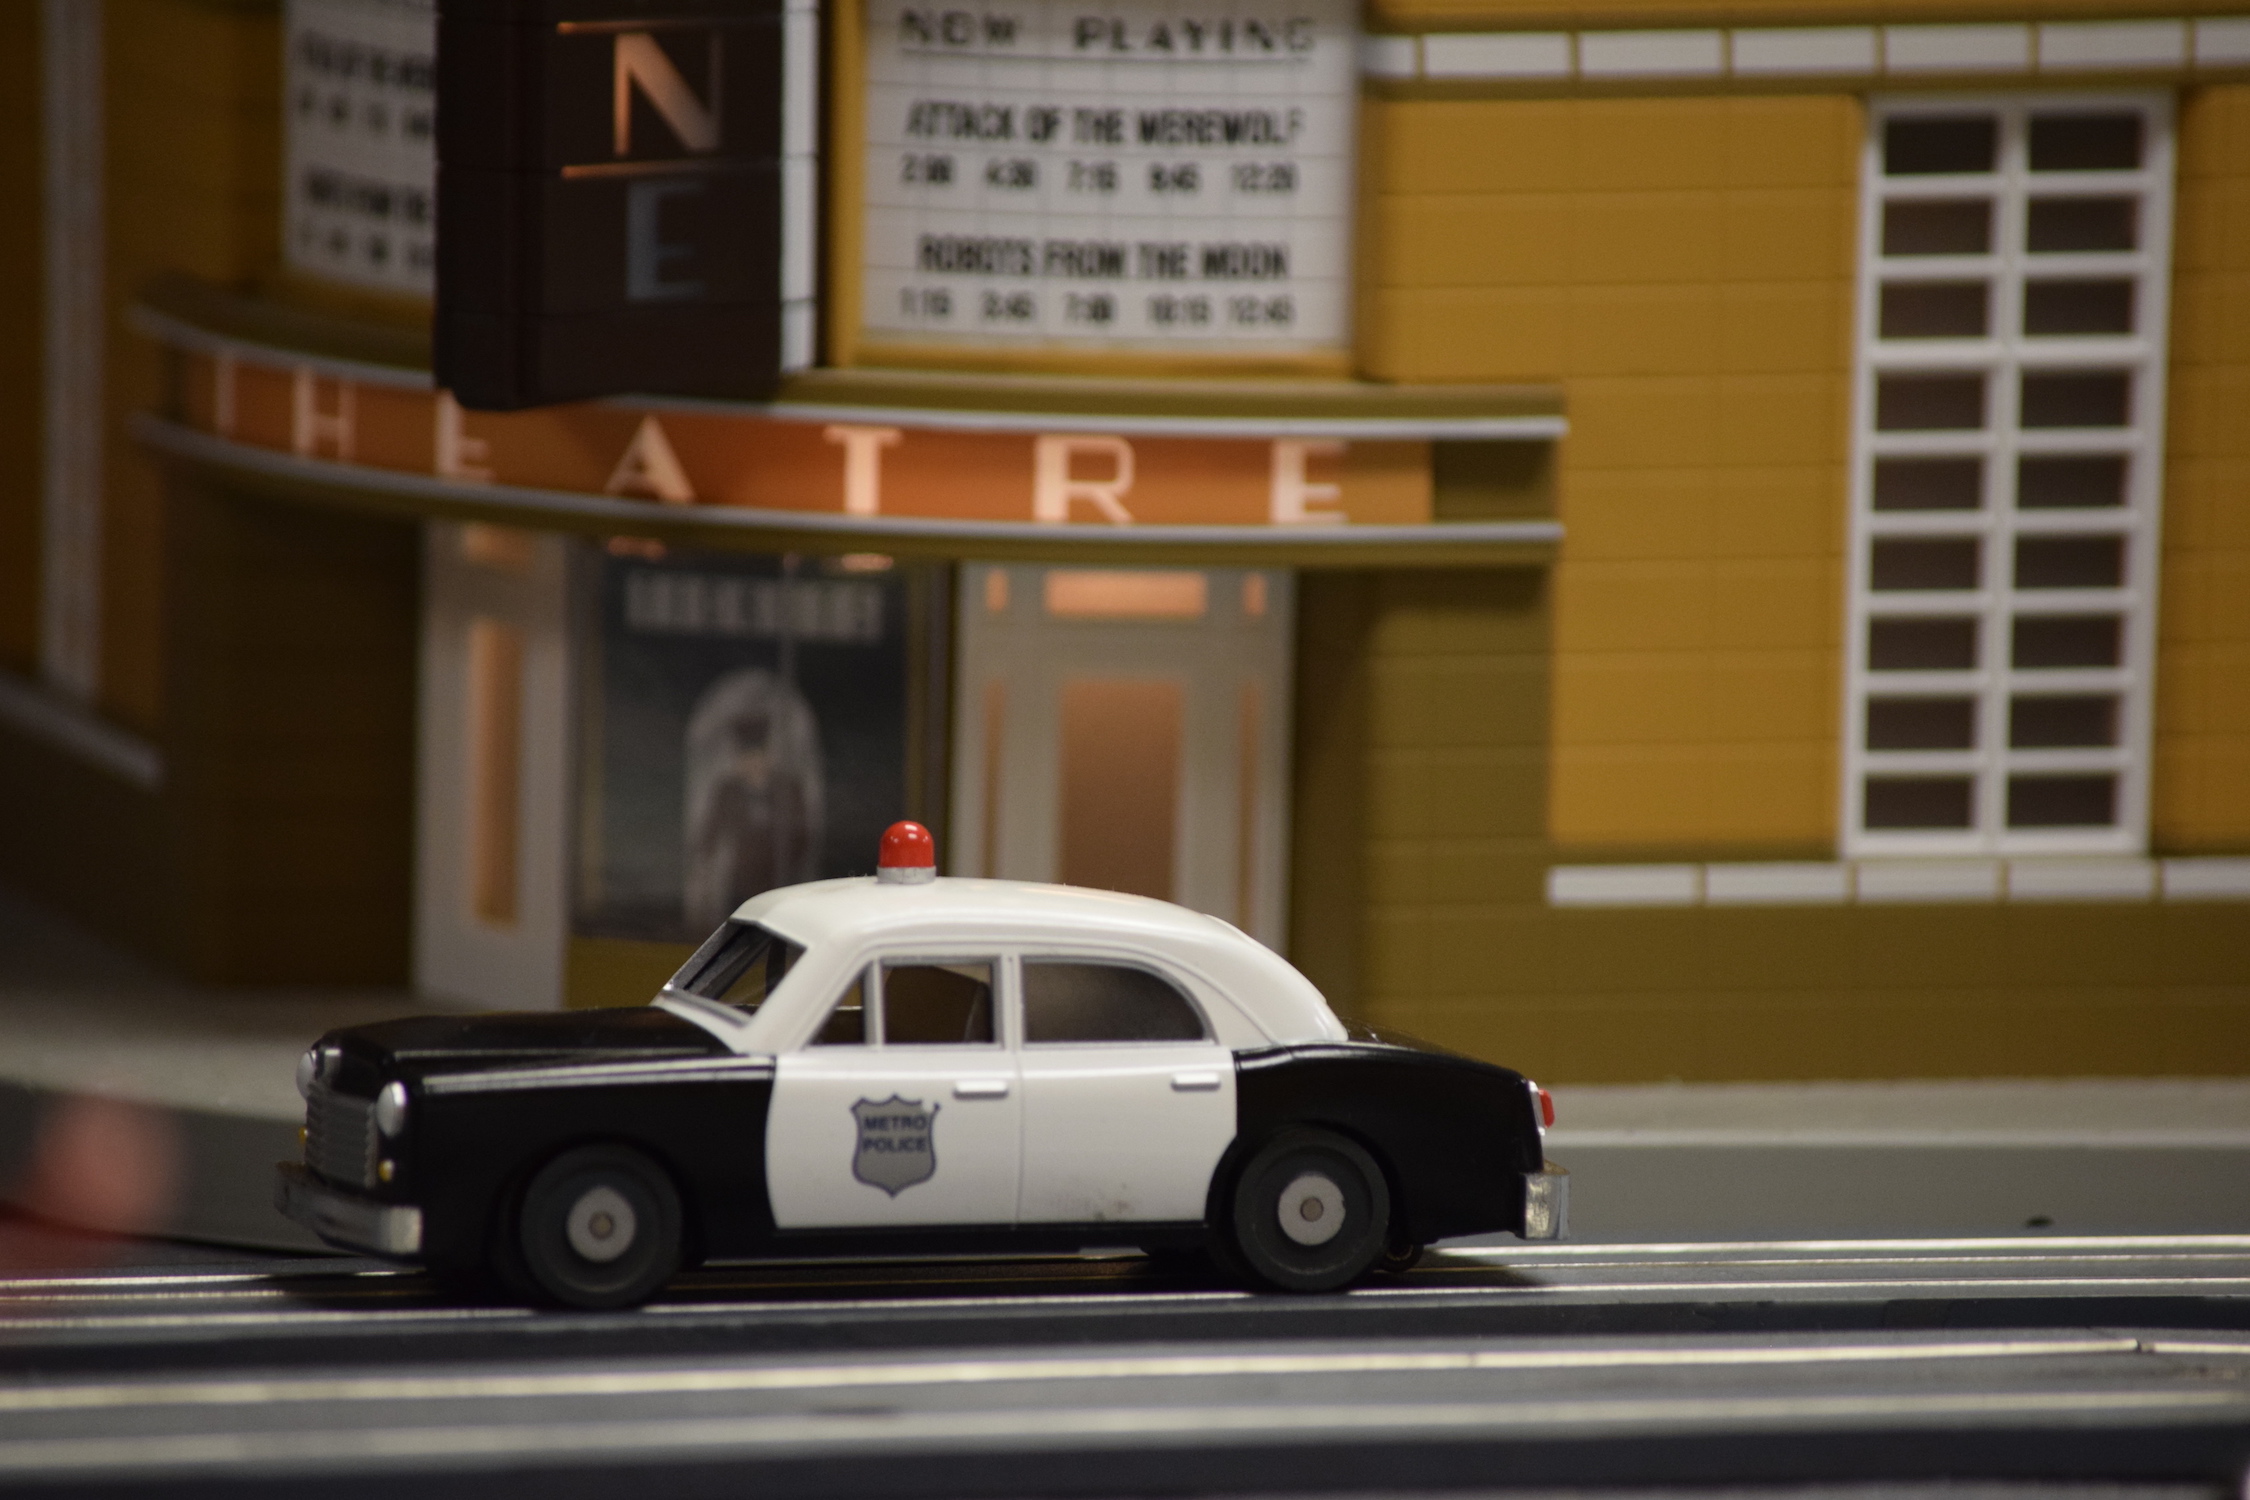 A movie theatre in town with a police car parked in front - "Christmas at the Roundhouse" model train display.